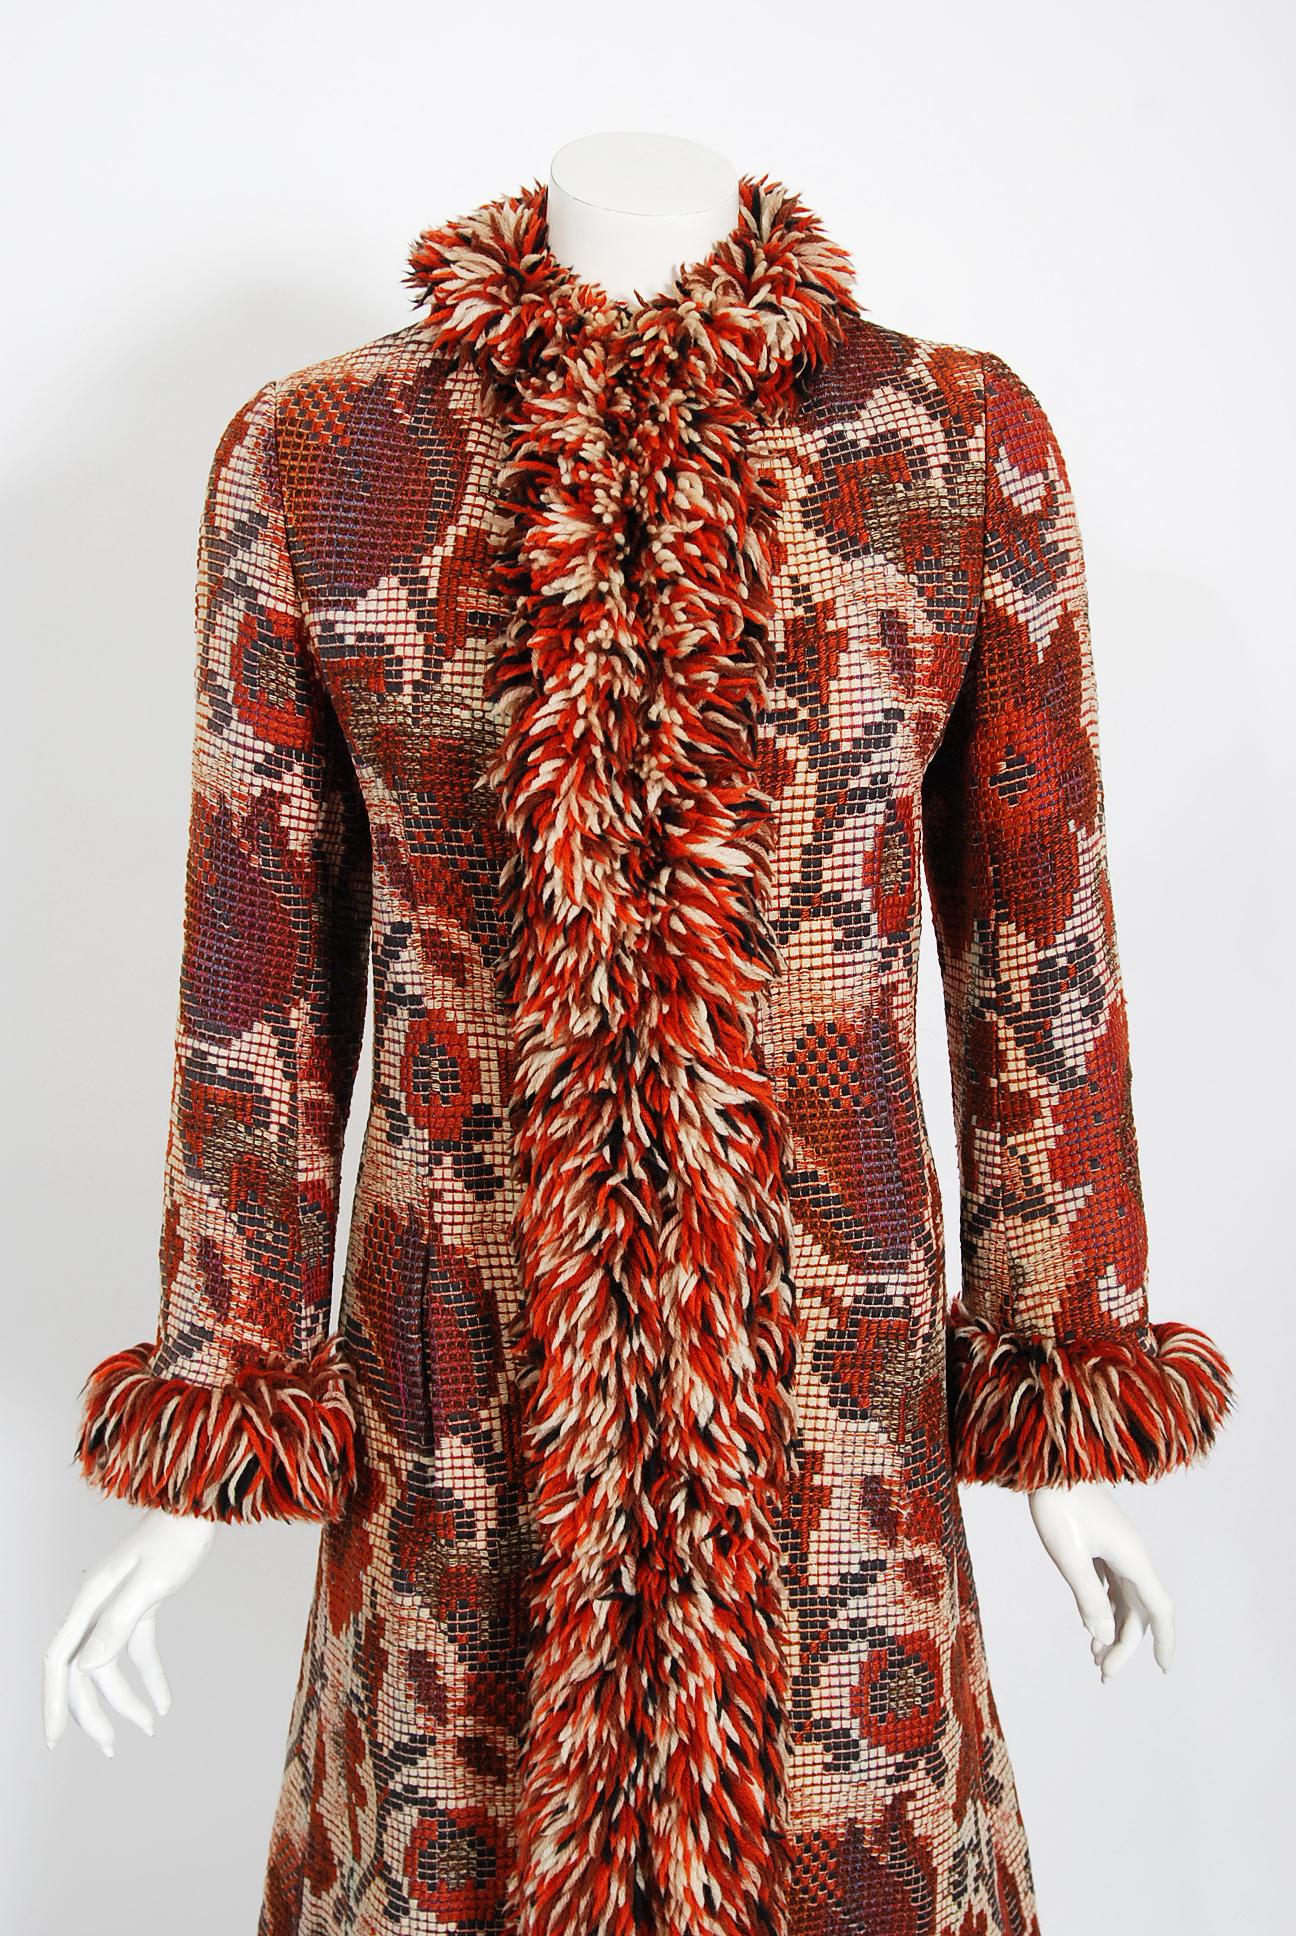 Gorgeous Anne Klein floral wool tapestry coat dating back to her 1970 collection. Anne formed Anne Klein and Company in 1968 and the lion logo was immediately identified with the brand. In 1970, Saks Fifth Avenue in New York launched the Anne Klein